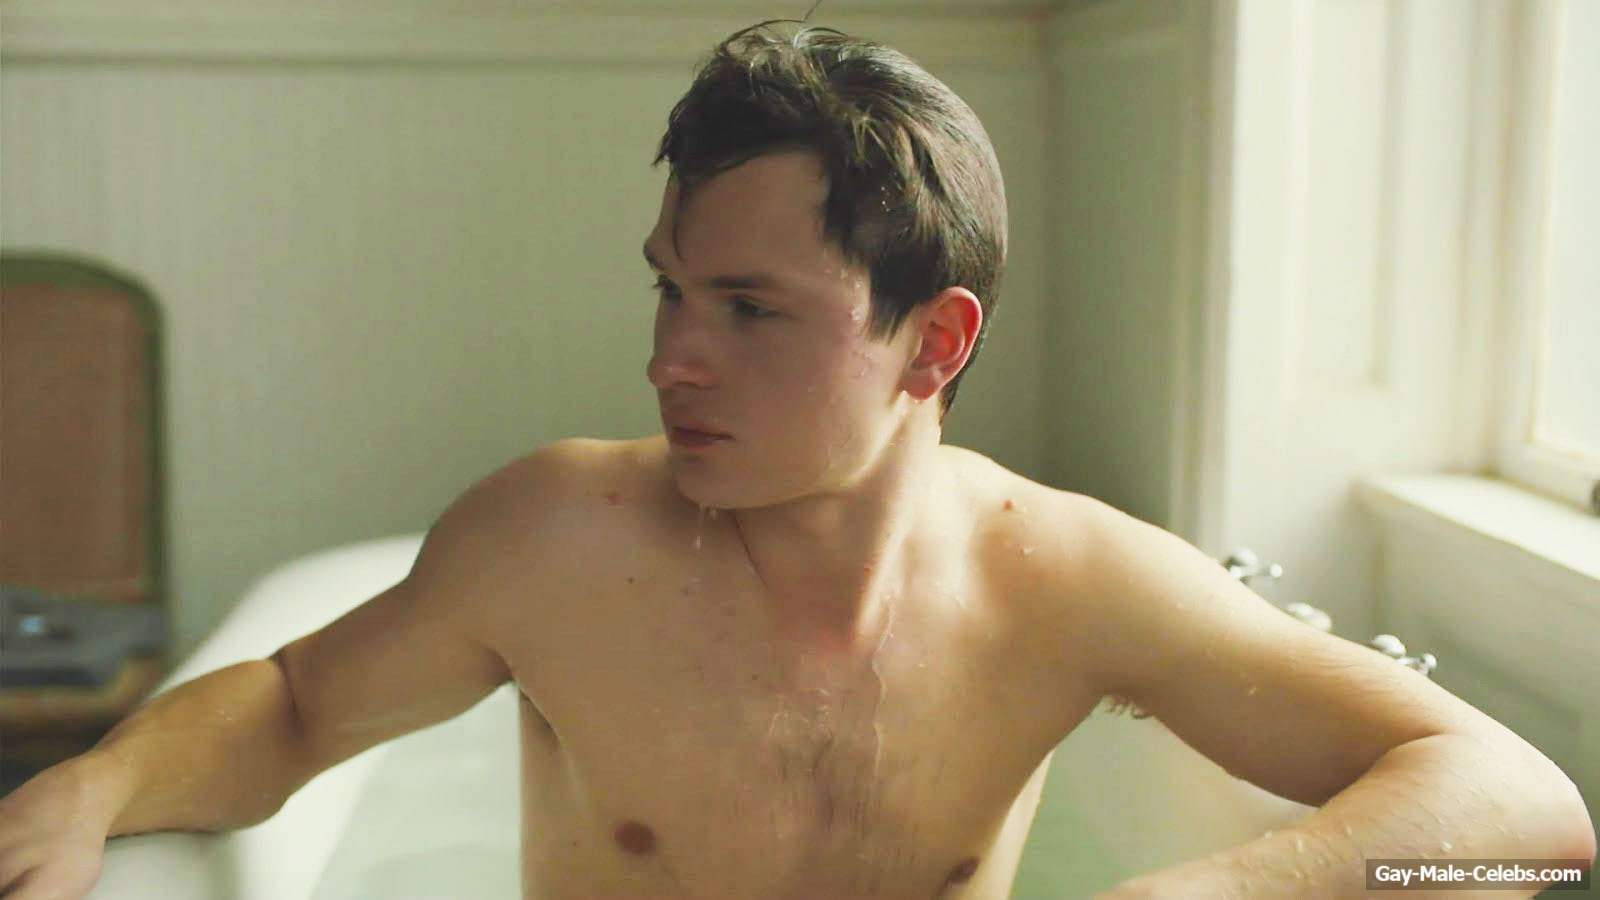 Ansel Elgort Wet Nude Body Scenes from The Goldfinch